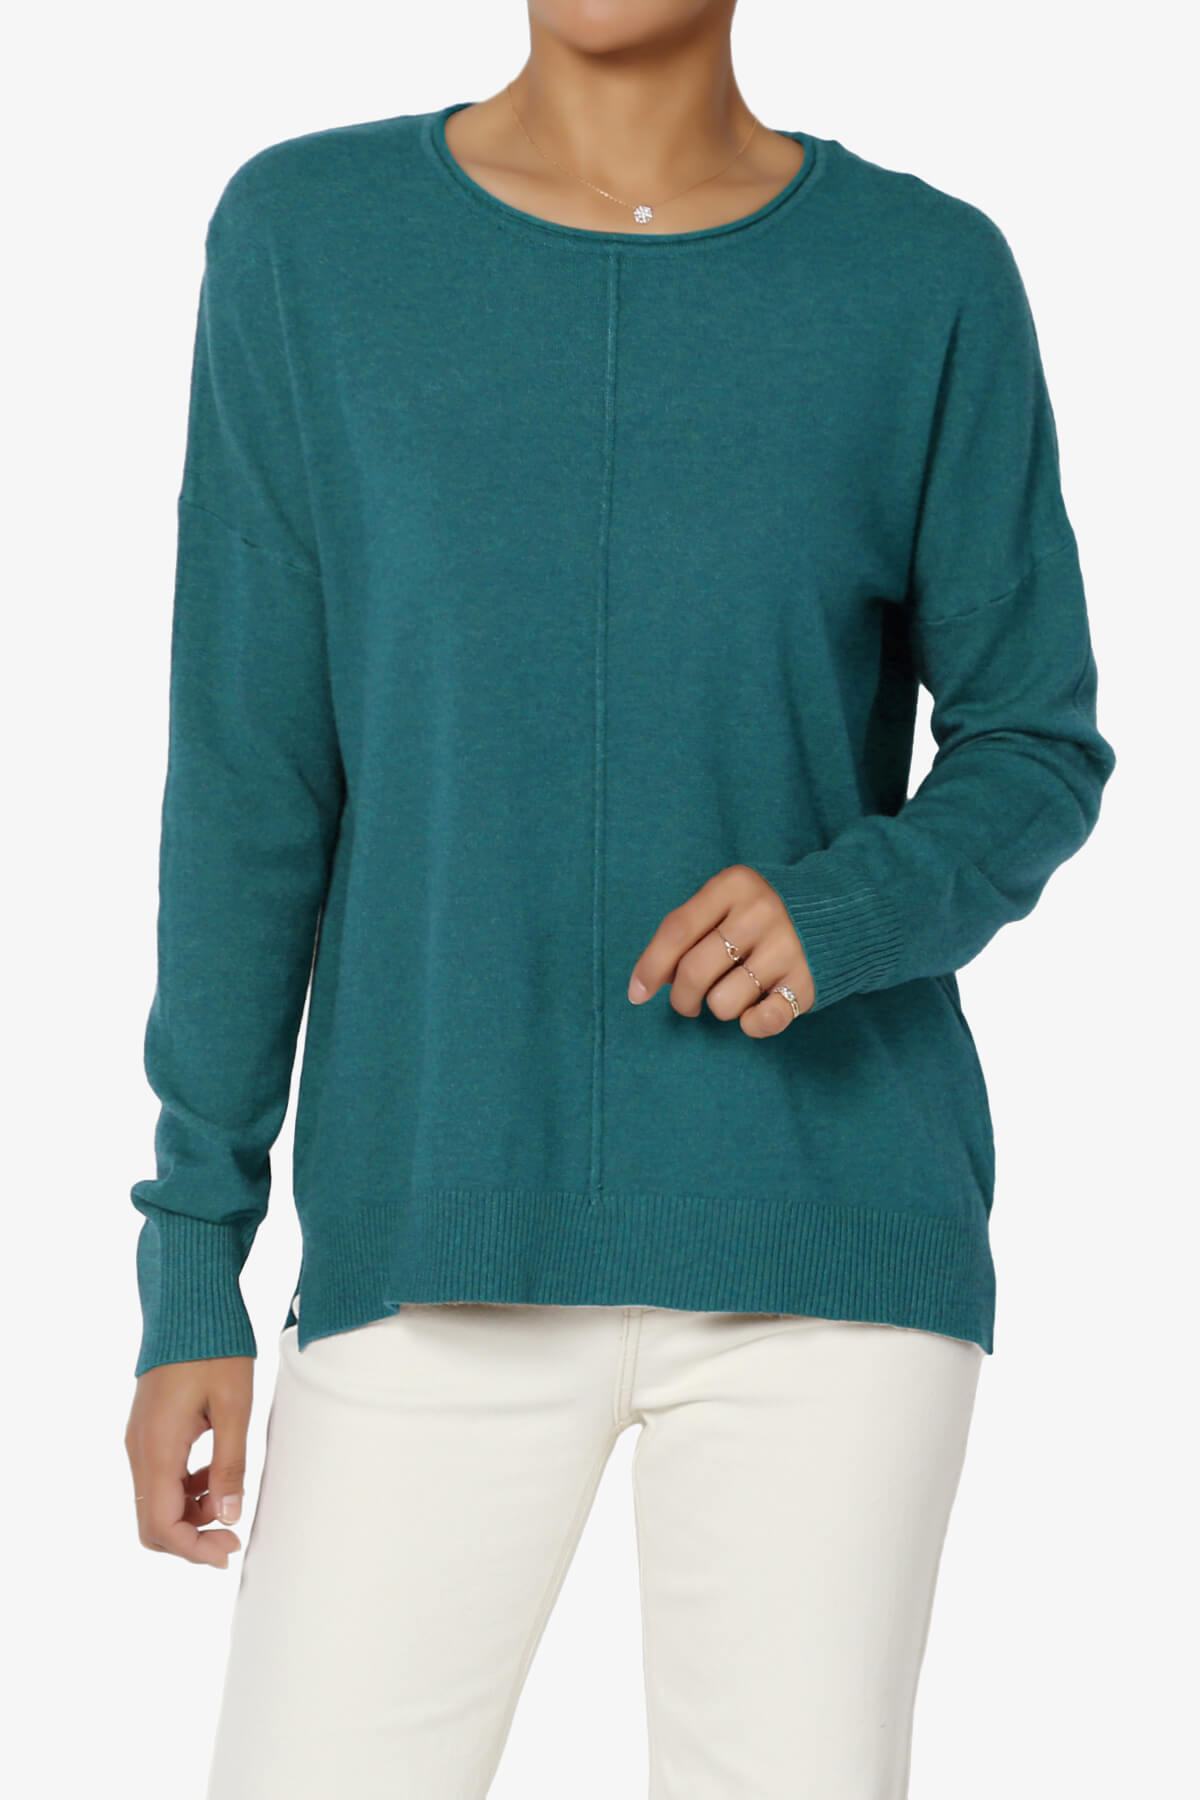 Load image into Gallery viewer, Carolina Long Sleeve Relaxed Fit Knit Top OCEAN TEAL_1
